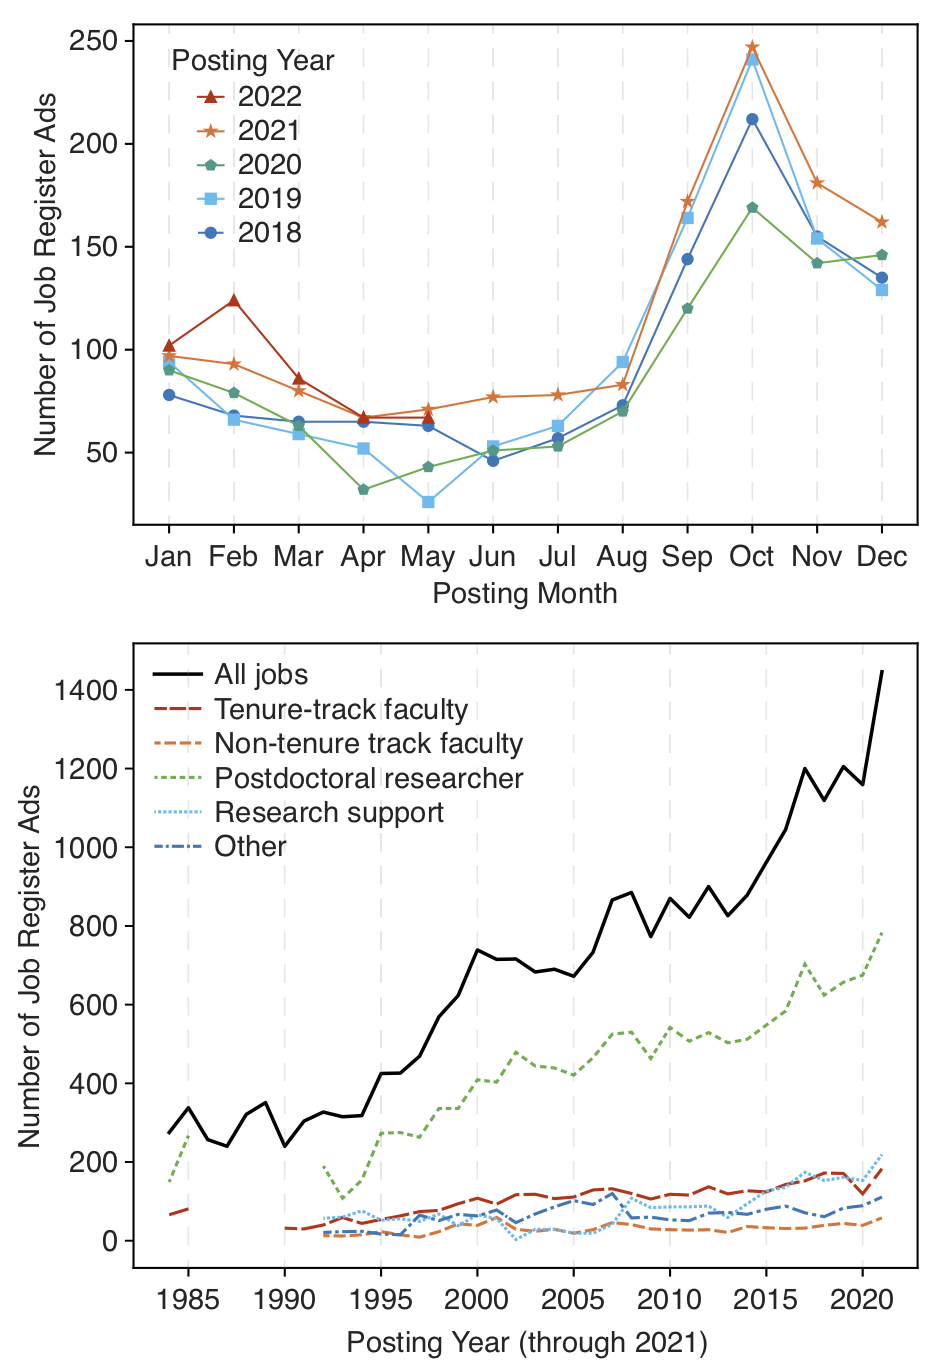 Two plots are shown. The top shows the number of jobs as a function of a posting month, with trend lines for each year from 2018-2021 and only through May for 2022. All years' data show a clear peak in Sept-Dec of about 150-250 jobs per month, while the rest of the year shows only about 50-100 jobs per month. The peak in 2020 was depressed by about 30%. The bottom plot show the number of job postings as a function of year, with trend lines for different job types (tenure-track faculty, non-tenure track faculty, postdoctoral researchers, research support, and other). All jobs show a steady increase in number from 1990 to today, with a year-to-year scatter of about 20%. The total number of jobs increased from about 300 in 1990 to about 1400 today. Just under half of those jobs are postdoctoral positions each year. Tenure-track and research support roles are the next most abundant, at about 200 positions each in 2021. Non-tenure-track faculty and other positions are the least abundant with fewer than 100 positions each in 2021. Most position types did not show strong growth in 2020, but the number of tenure-track faculty positions dipped by about 30%.